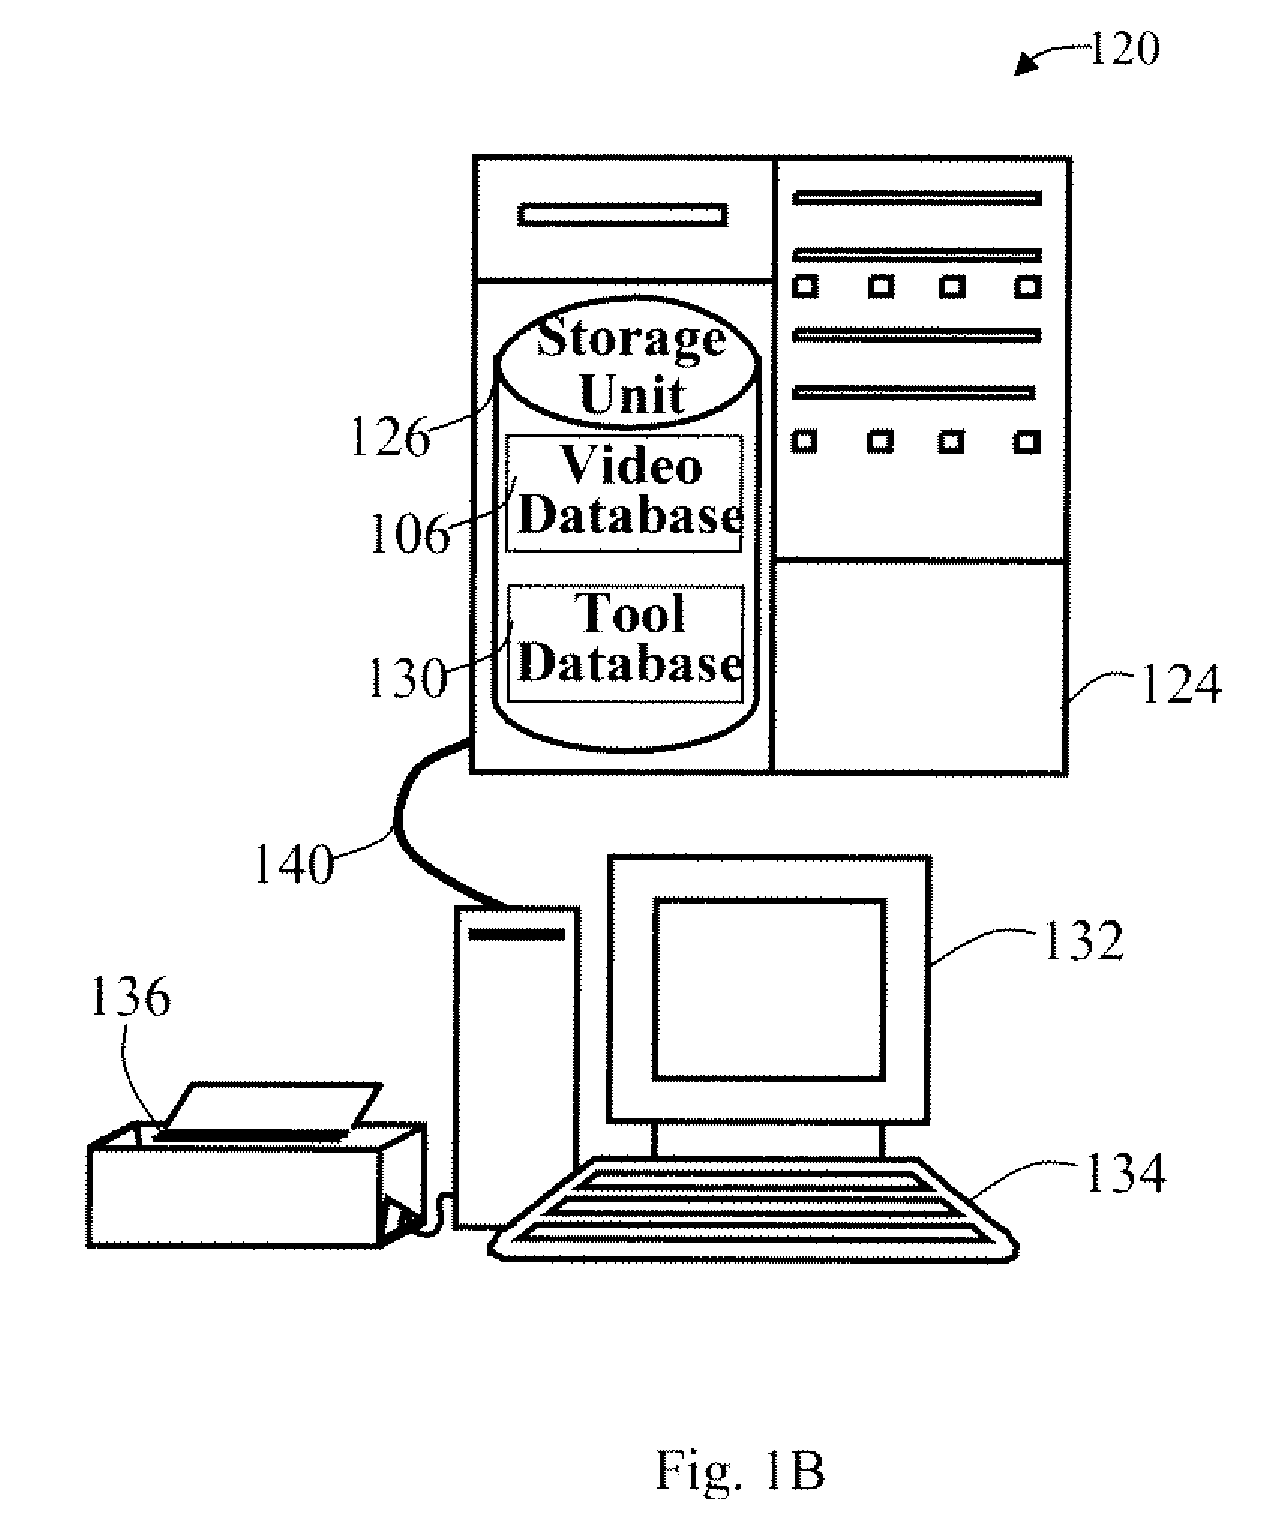 Method and apparatus for multi-dimensional content search and video identification